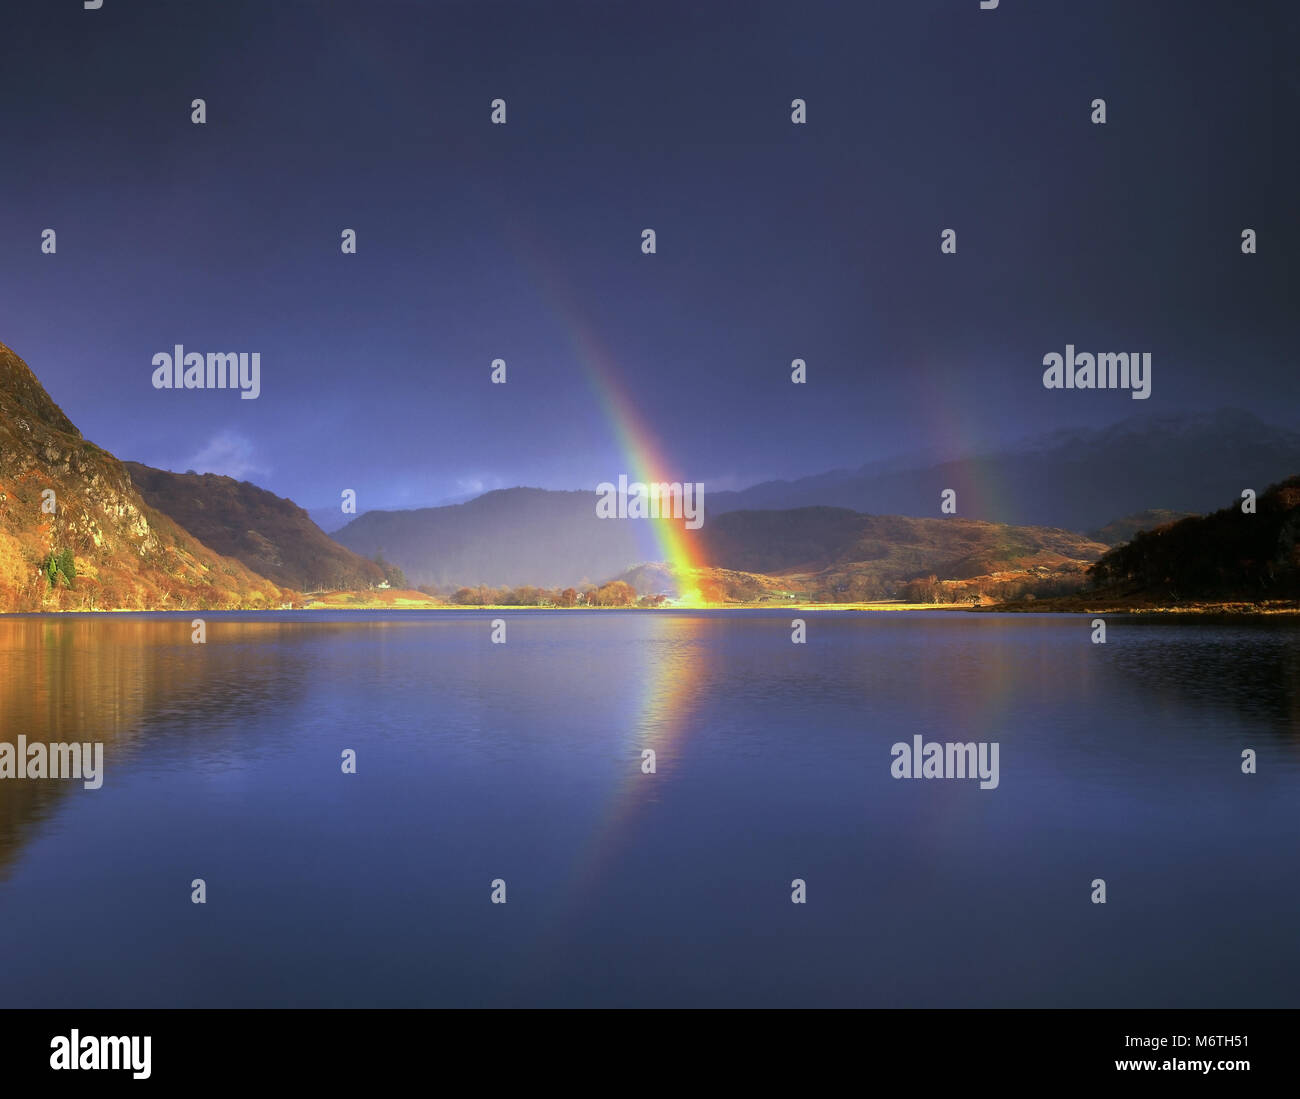 A vivid rainbow brightens up a dark sky over Llyn Dinas in the Snowdonia National Park, Wales. Stock Photo